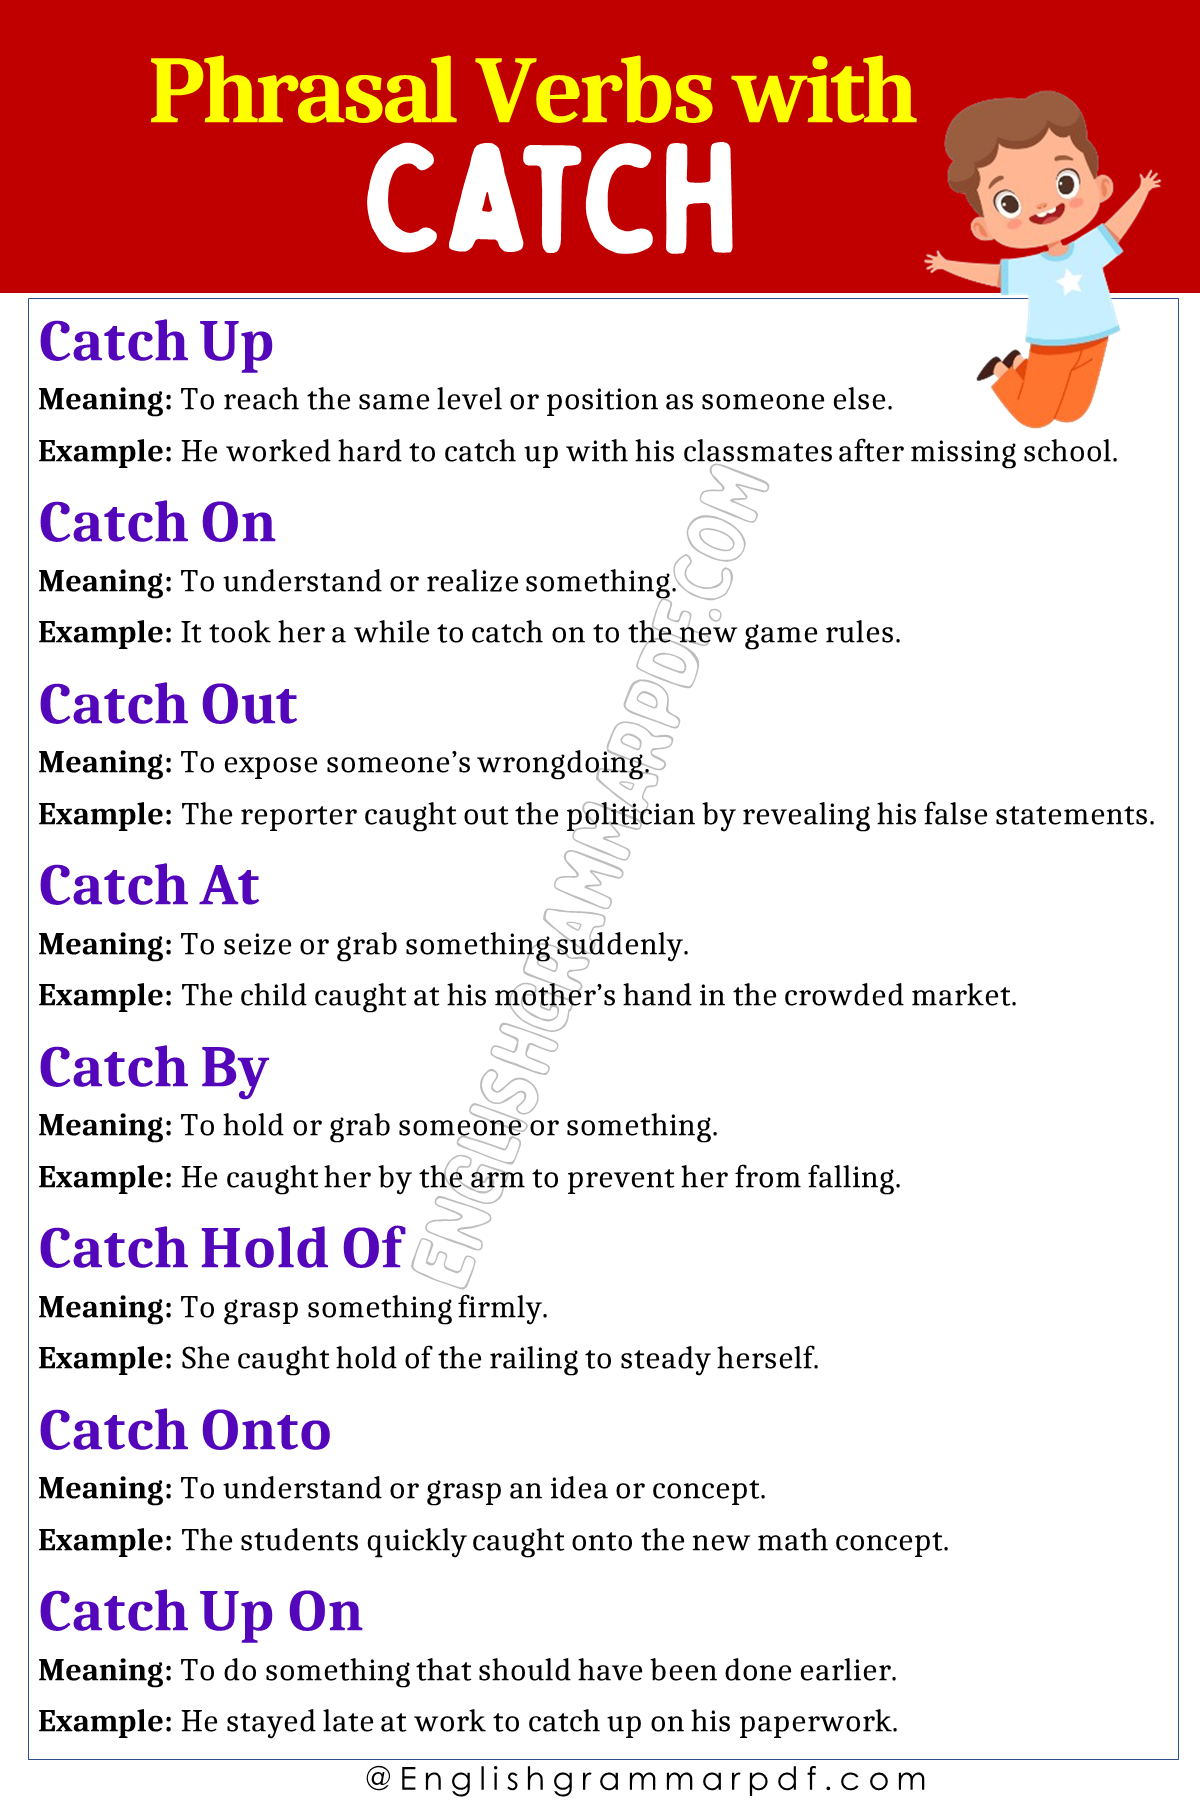 Phrasal Verbs with Catch